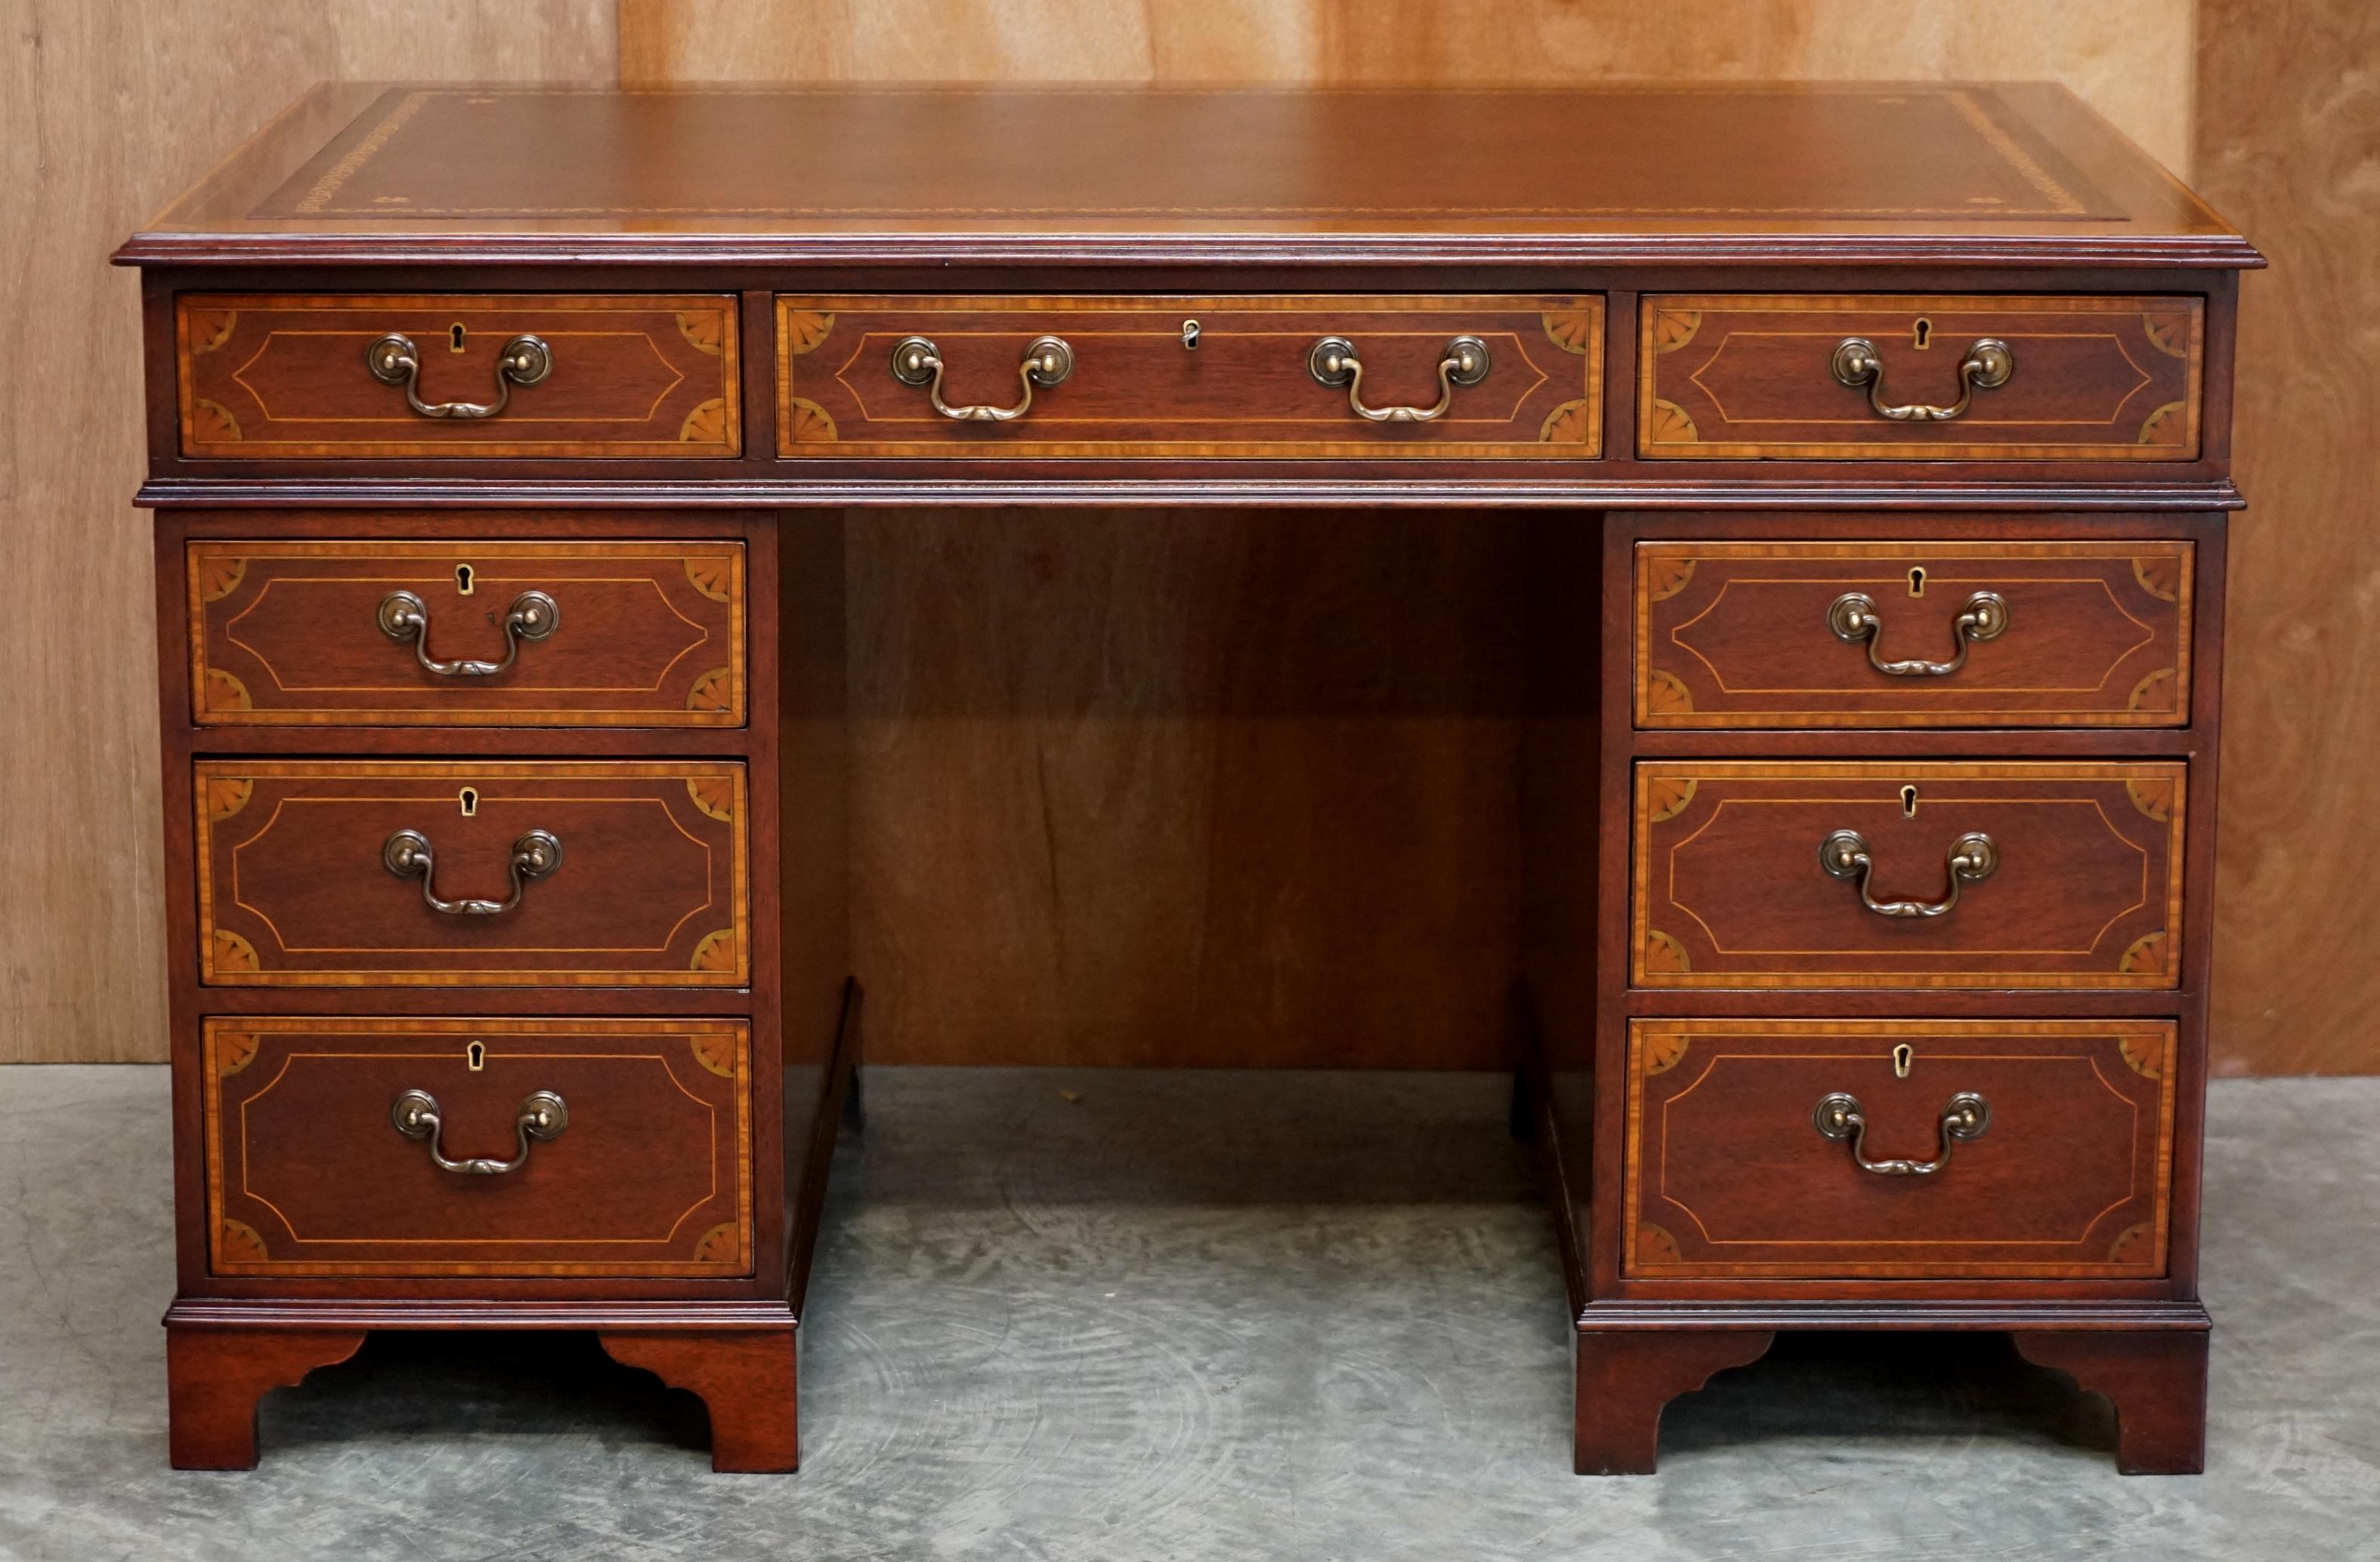 We are delighted to offer for sale this absolutely exquisite fully restored Victorian Sheraton Revival partner desk with oxblood leather writing surface

This is pretty much the finest desk I have ever seen, the quality of the inlaid is sublime,